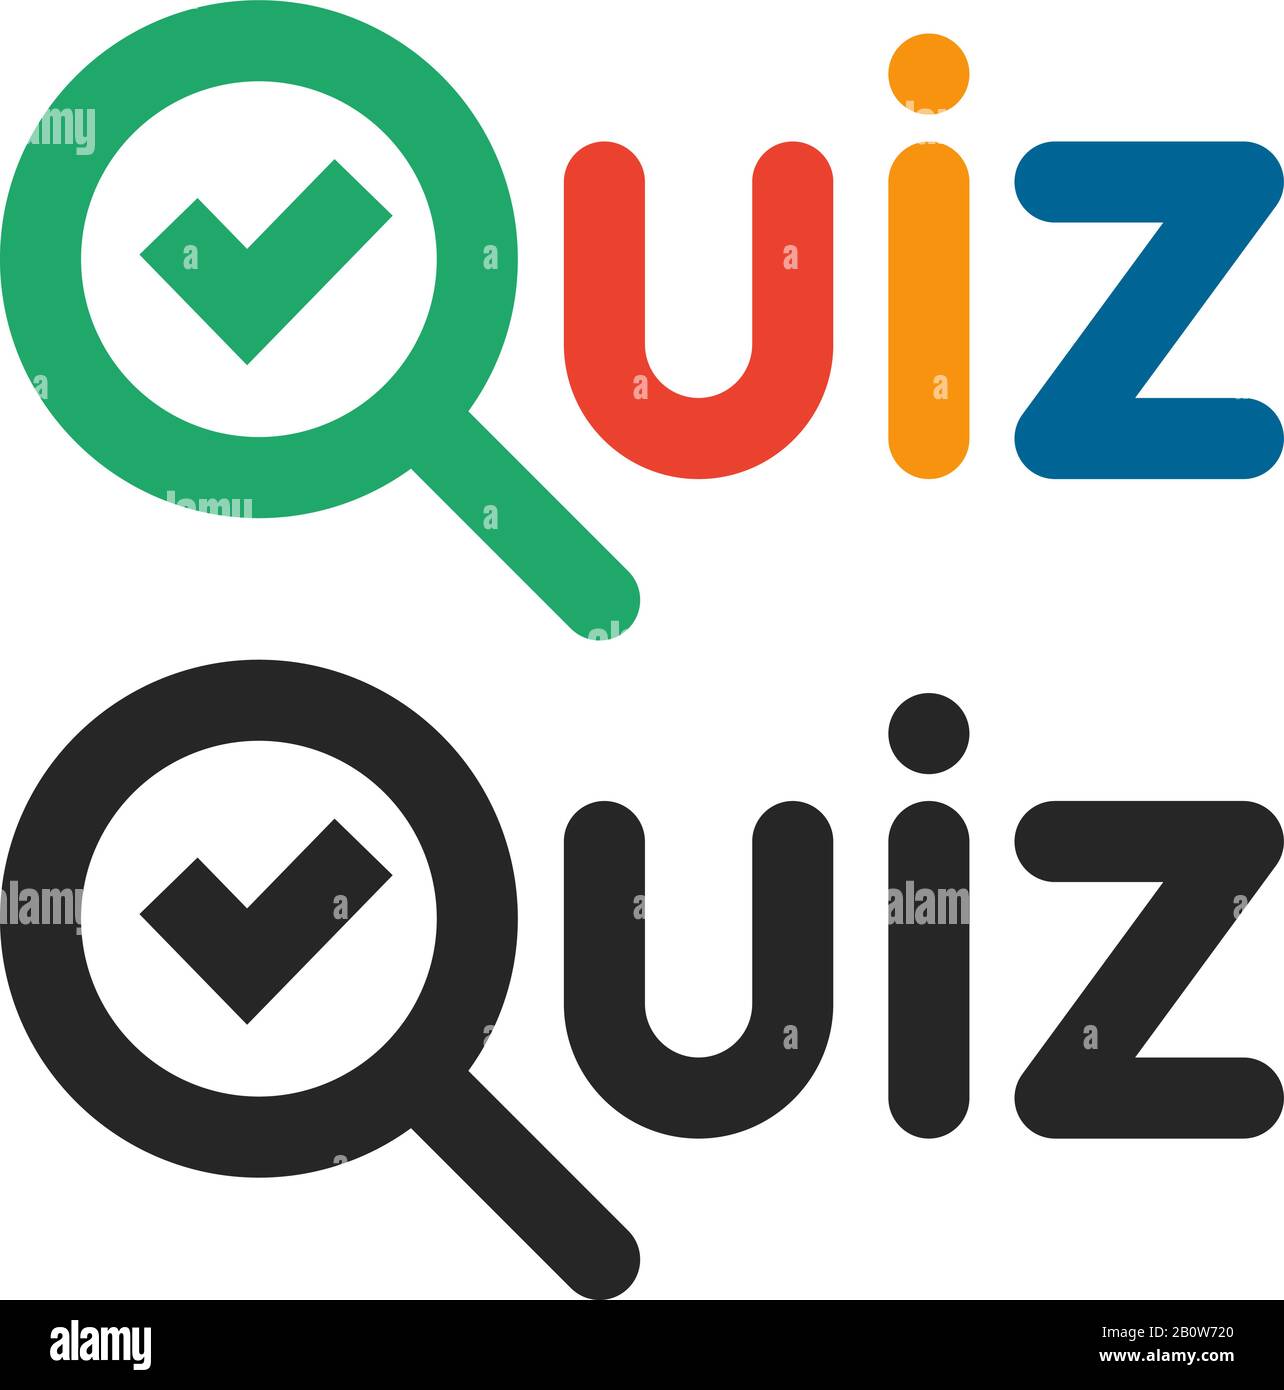 Quiz game show logo. Quizzes and test competition icon with tick symbol. Vector word logotype Stock Vector